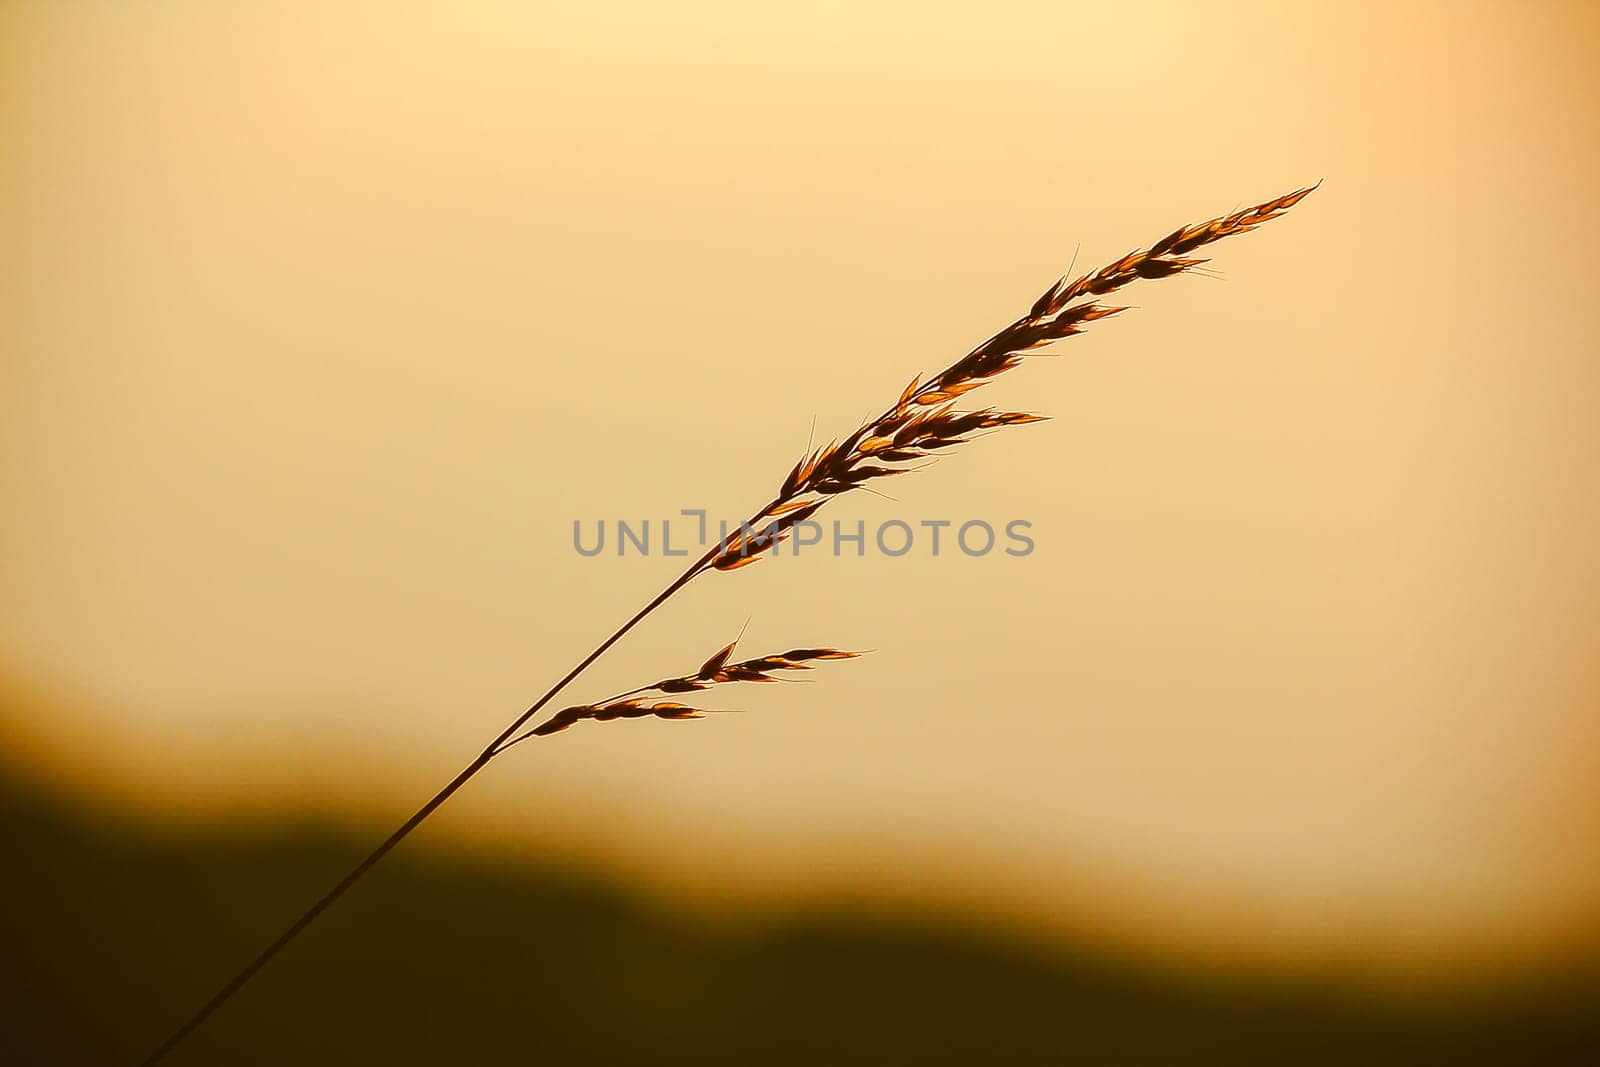 The silhouette of the grass and the sun